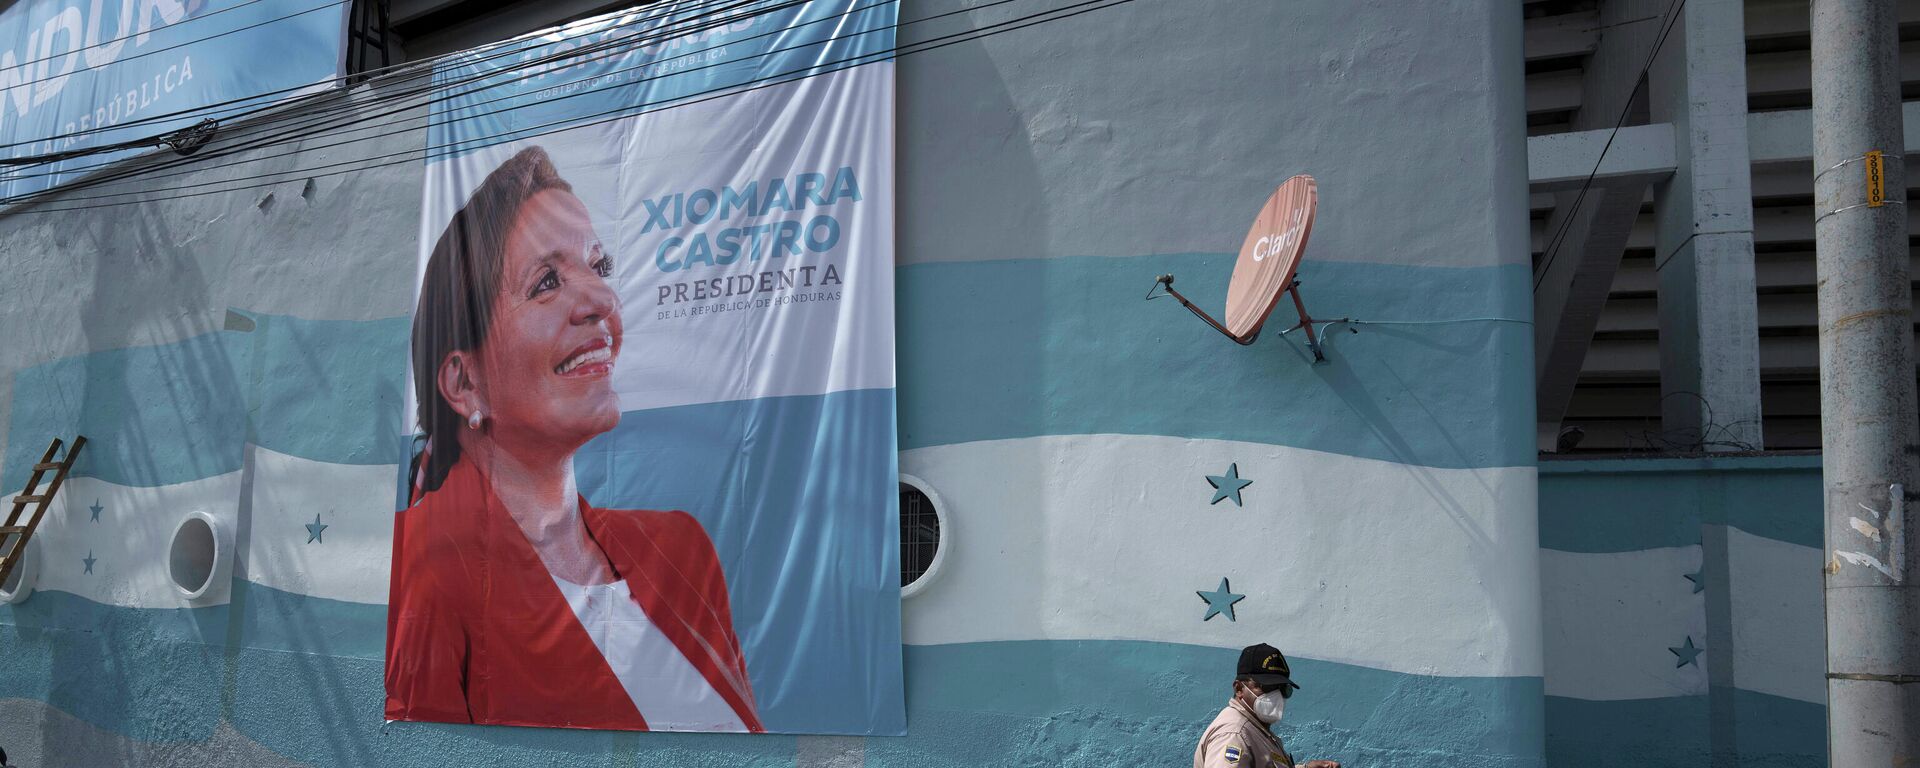 A banner promoting President-elect Xiomara Castro hangs on a wall at the National Stadium in Tegucigalpa, Honduras, Wednesday, Jan. 26, 2022. Castro, Honduras' first female president, is scheduled to be sworn in during a ceremony at the stadium on Thursday, Jan. 27.  - Sputnik International, 1920, 20.09.2022